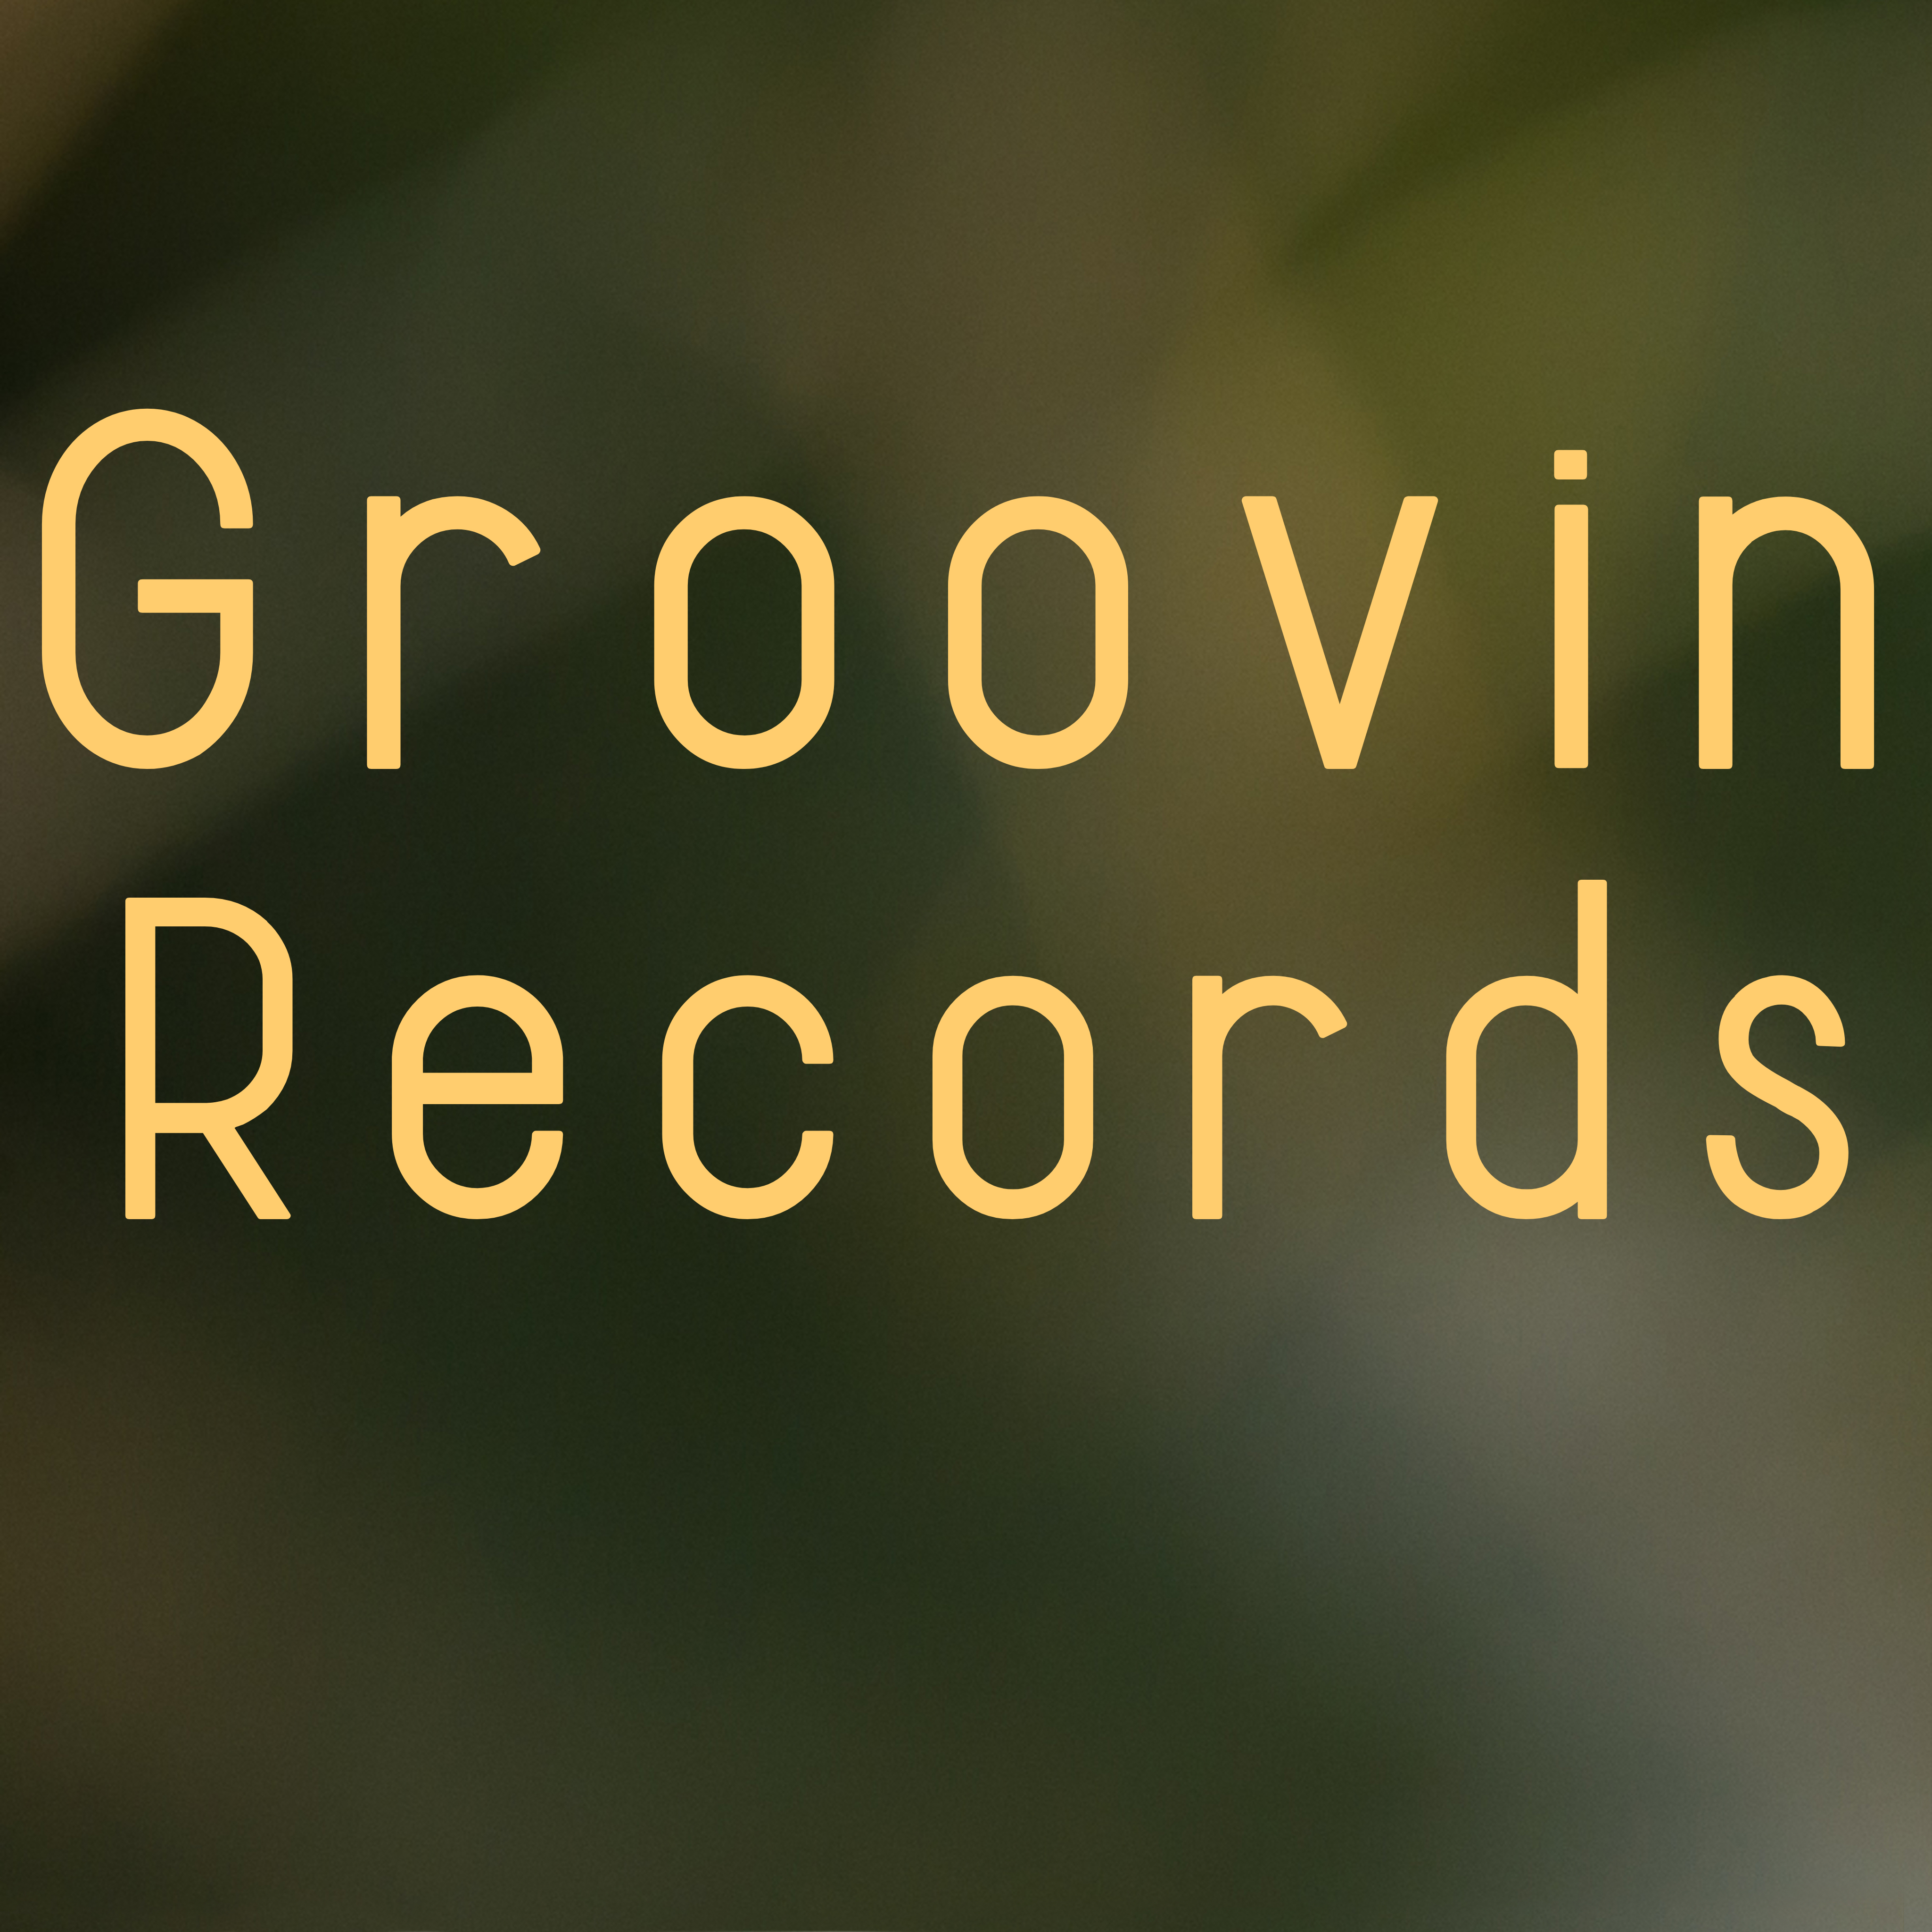 Groovin Records